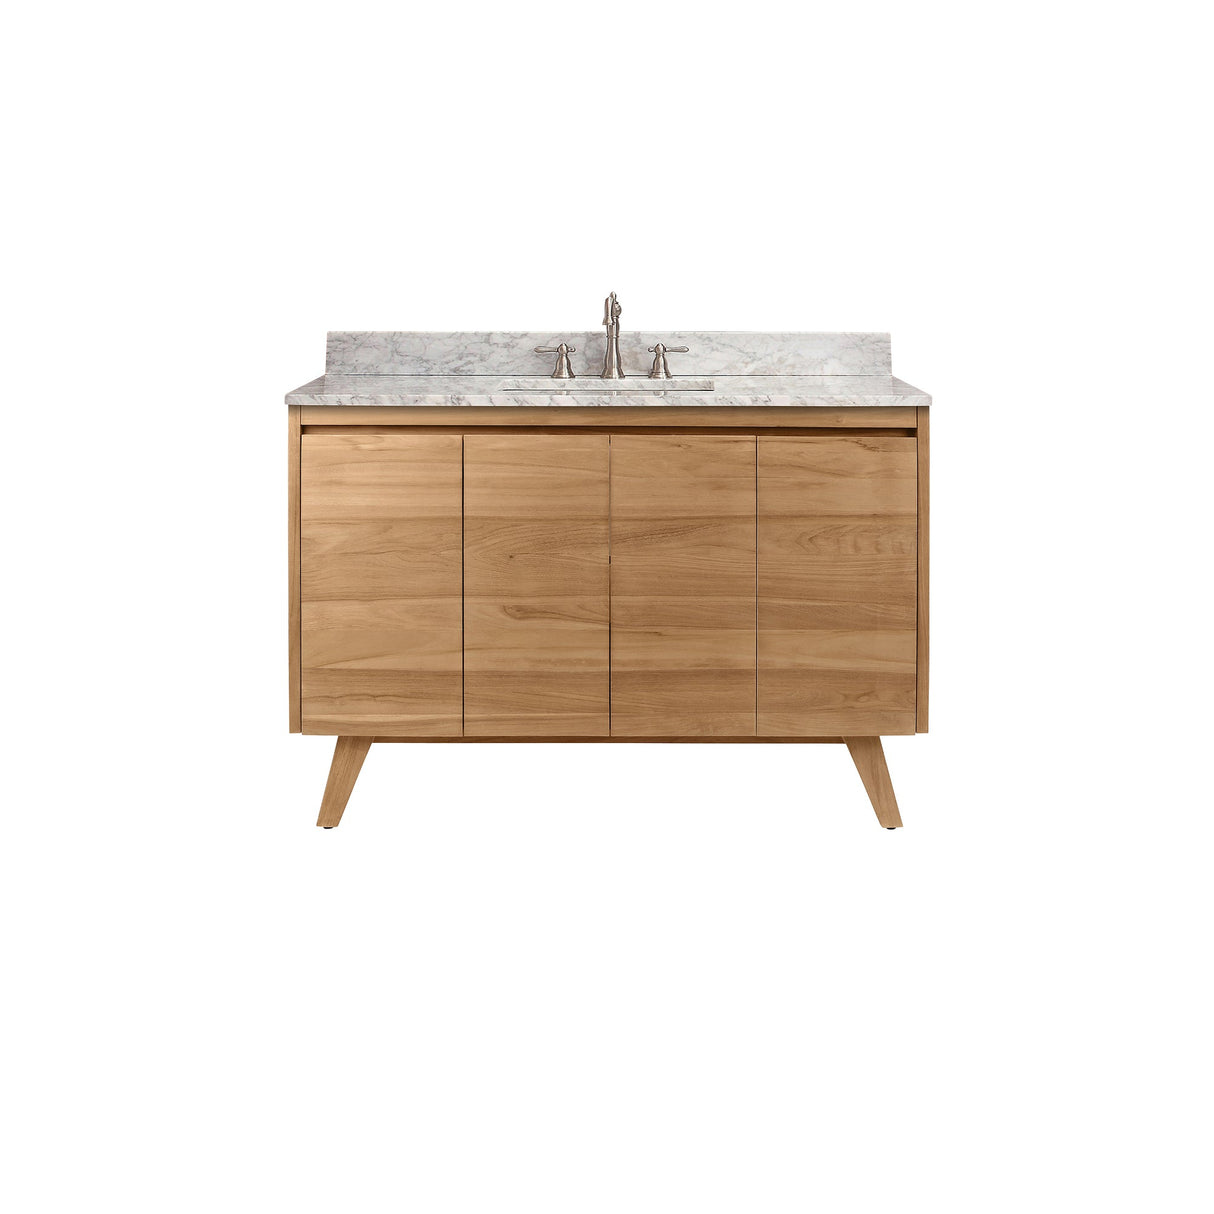 Avanity Coventry 49 in. Vanity Combo in Natural Teak with Carrara White Marble Top